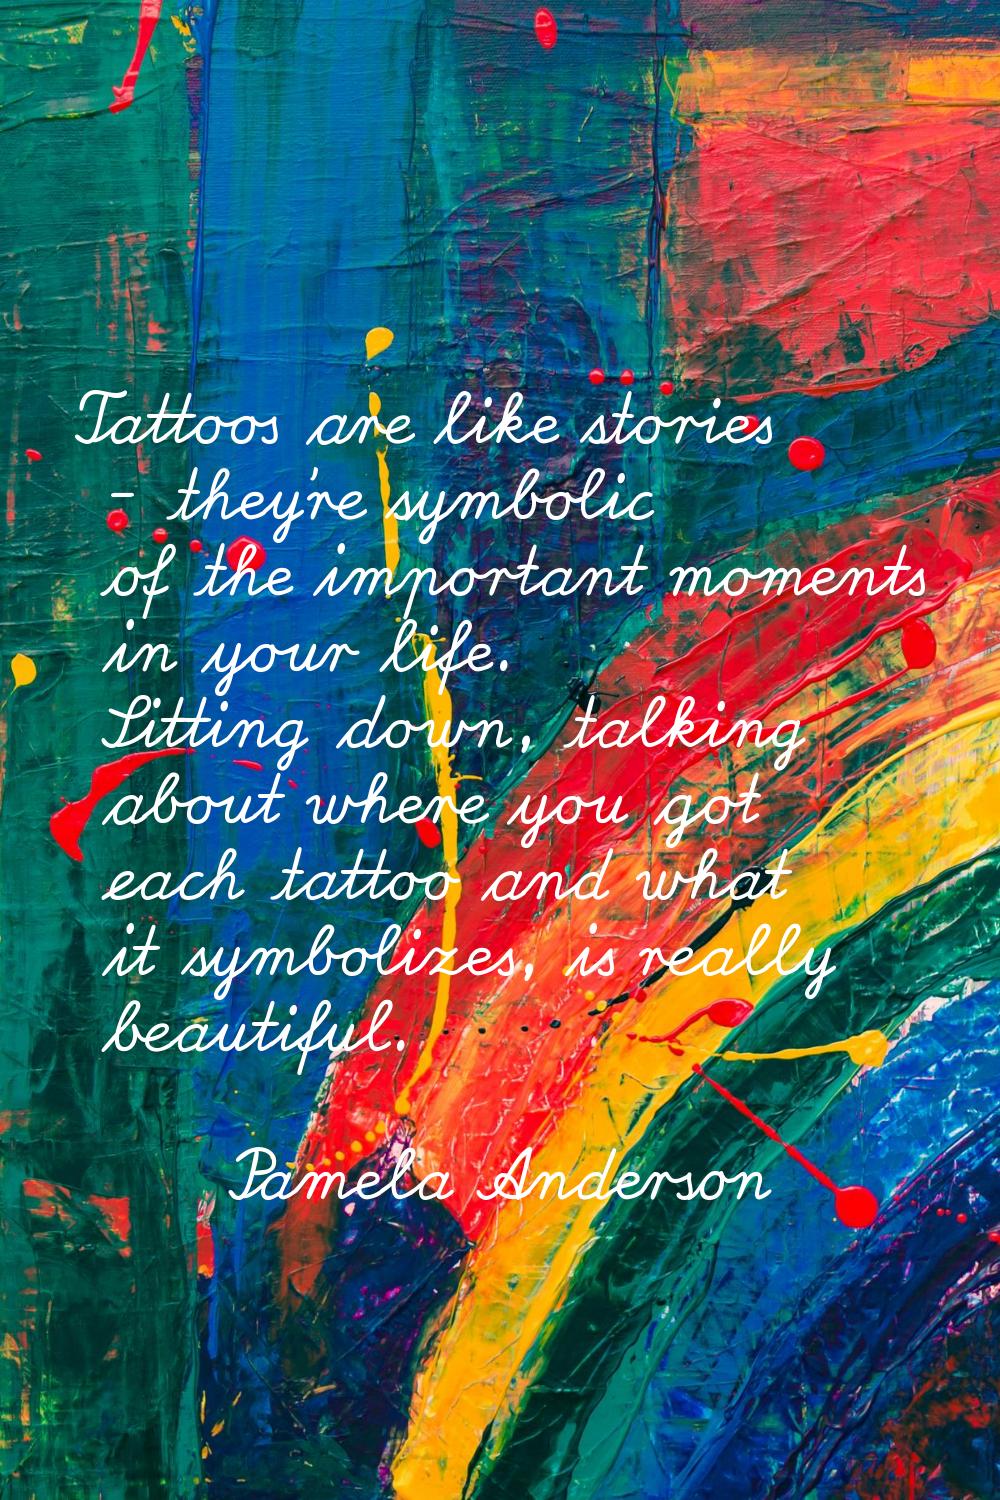 Tattoos are like stories - they're symbolic of the important moments in your life. Sitting down, ta